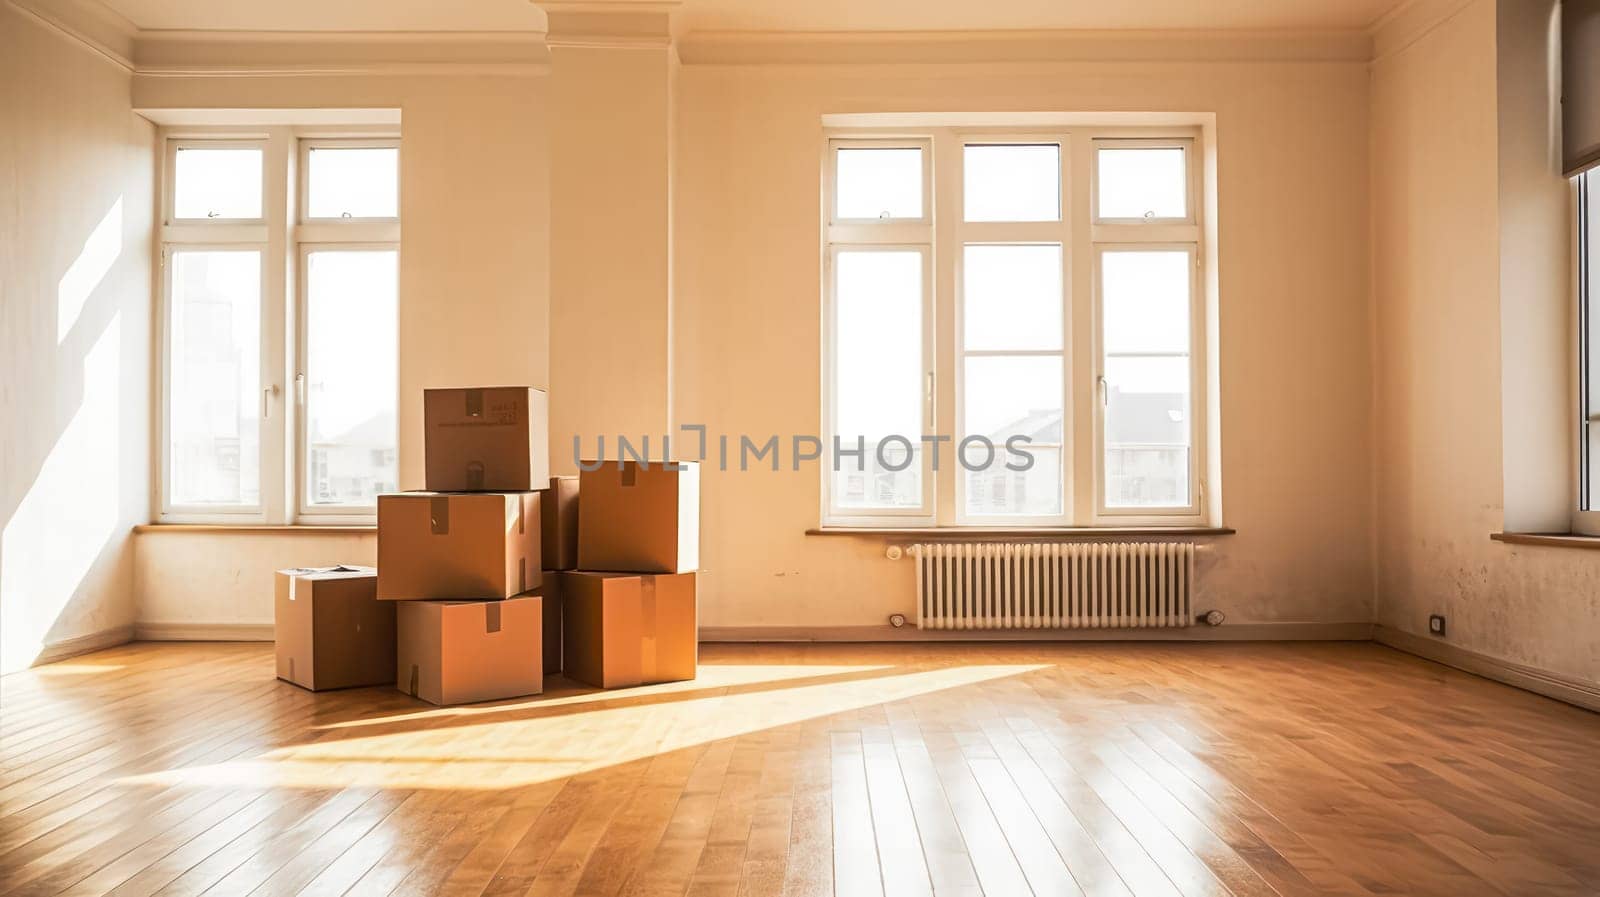 Cardboard boxes and household items indoors, ideal for moving day concepts. by Alla_Morozova93